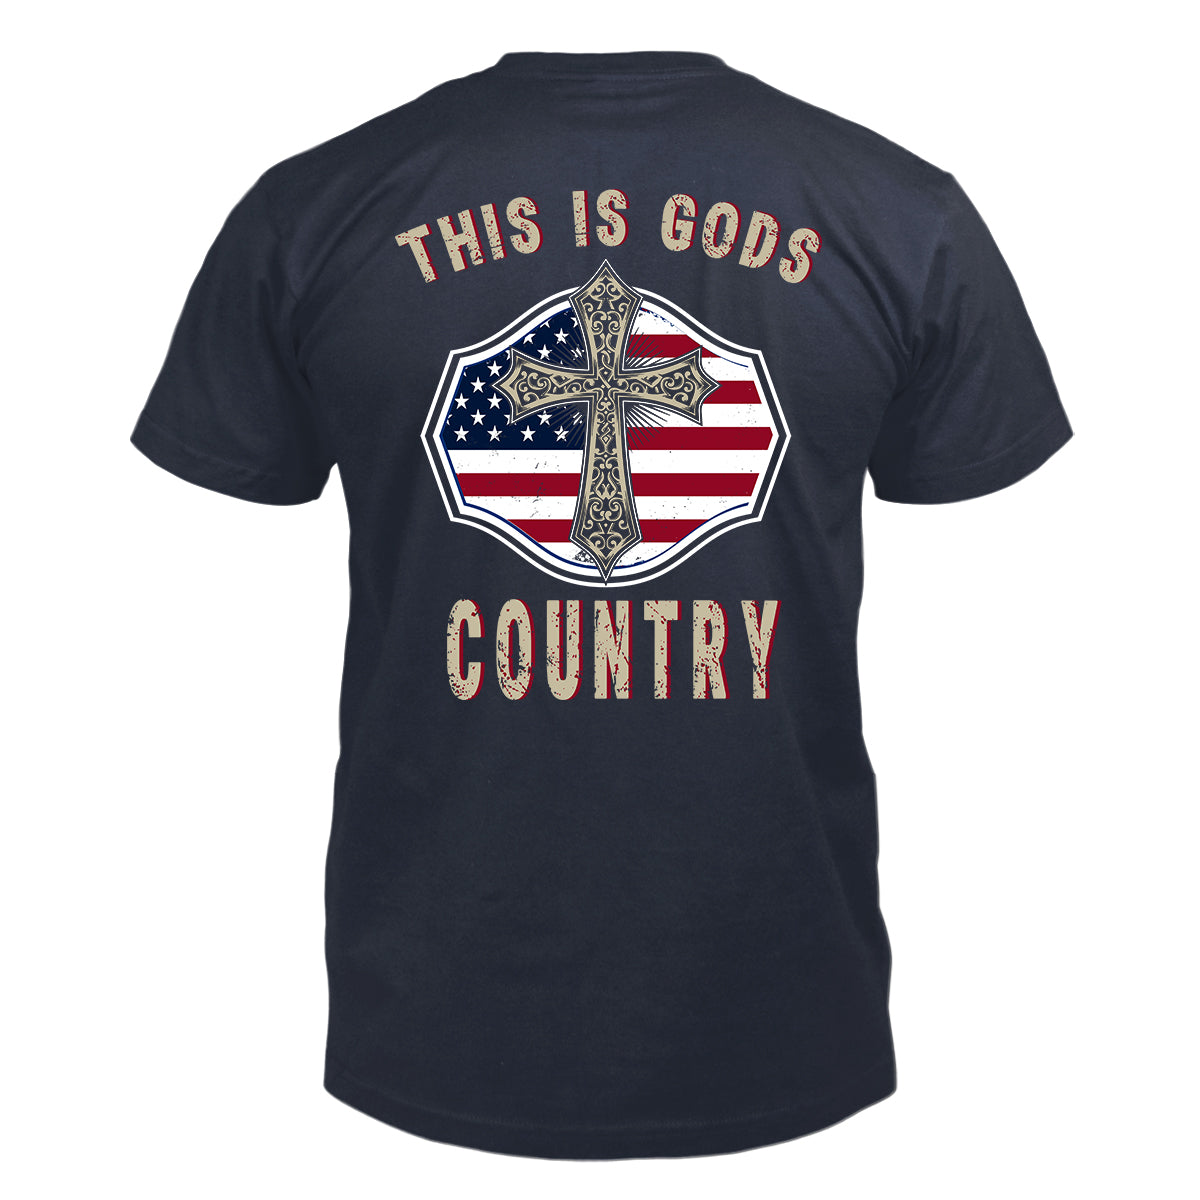 This Is God's Country Men's T-Shirt